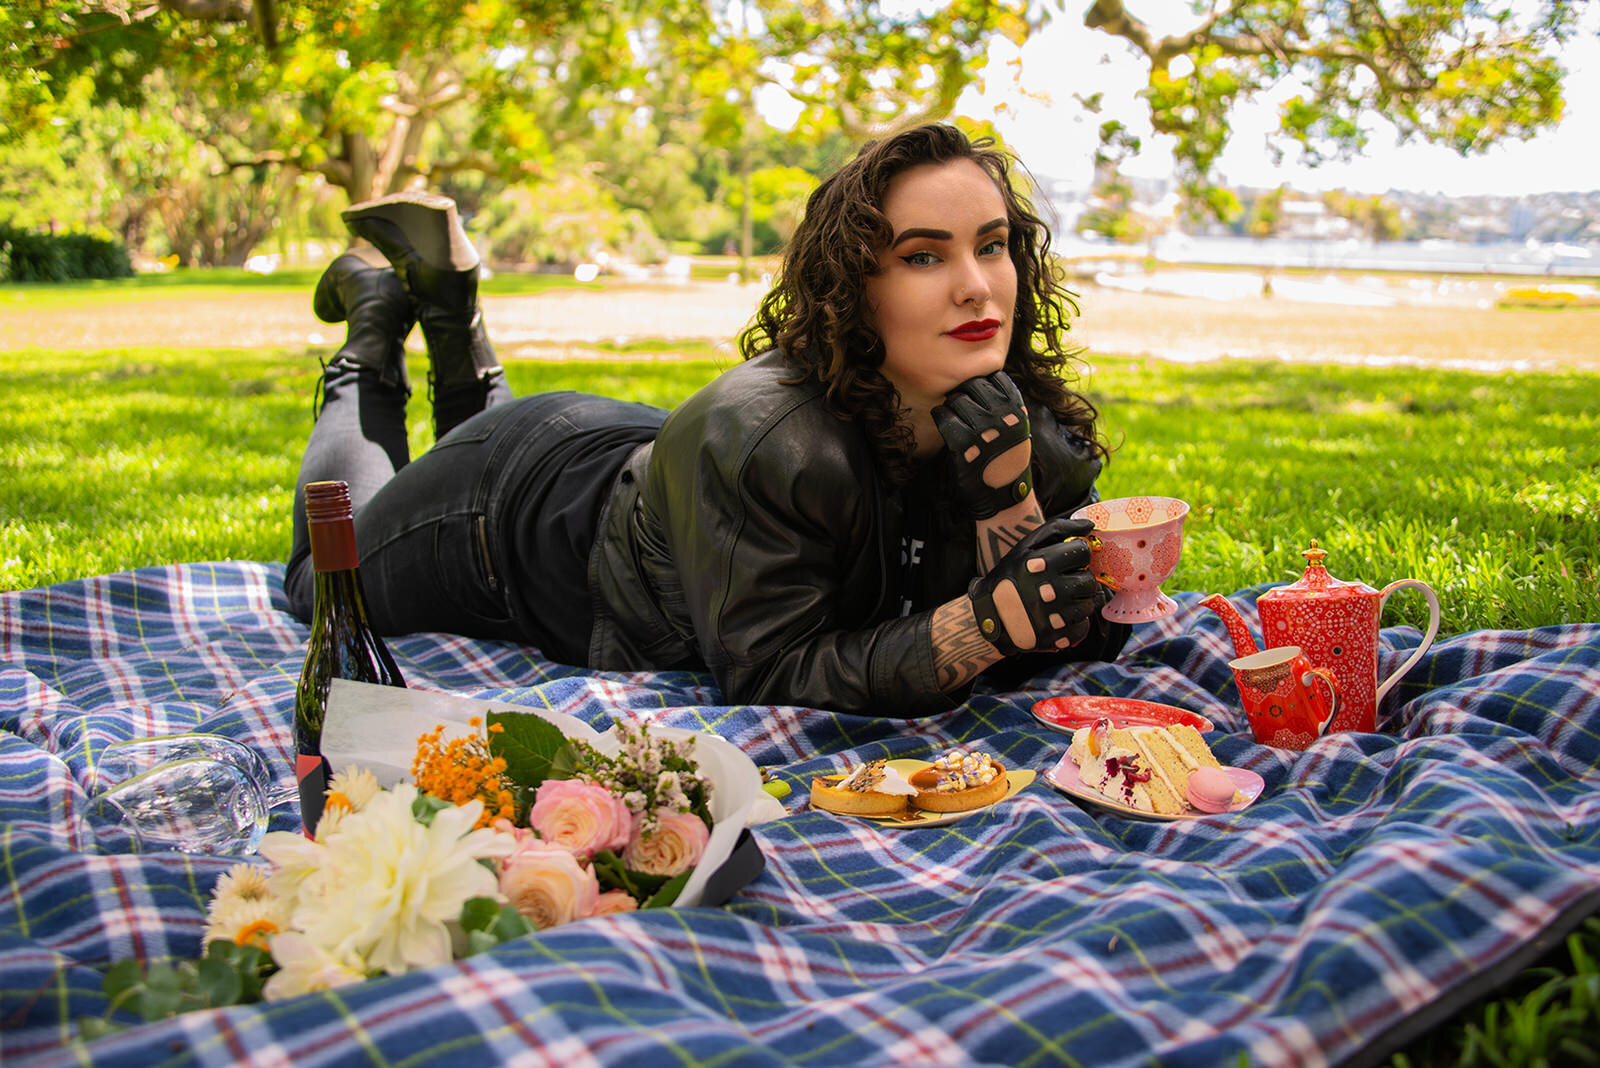 miss tallula leather gloves boots picnic.jpg